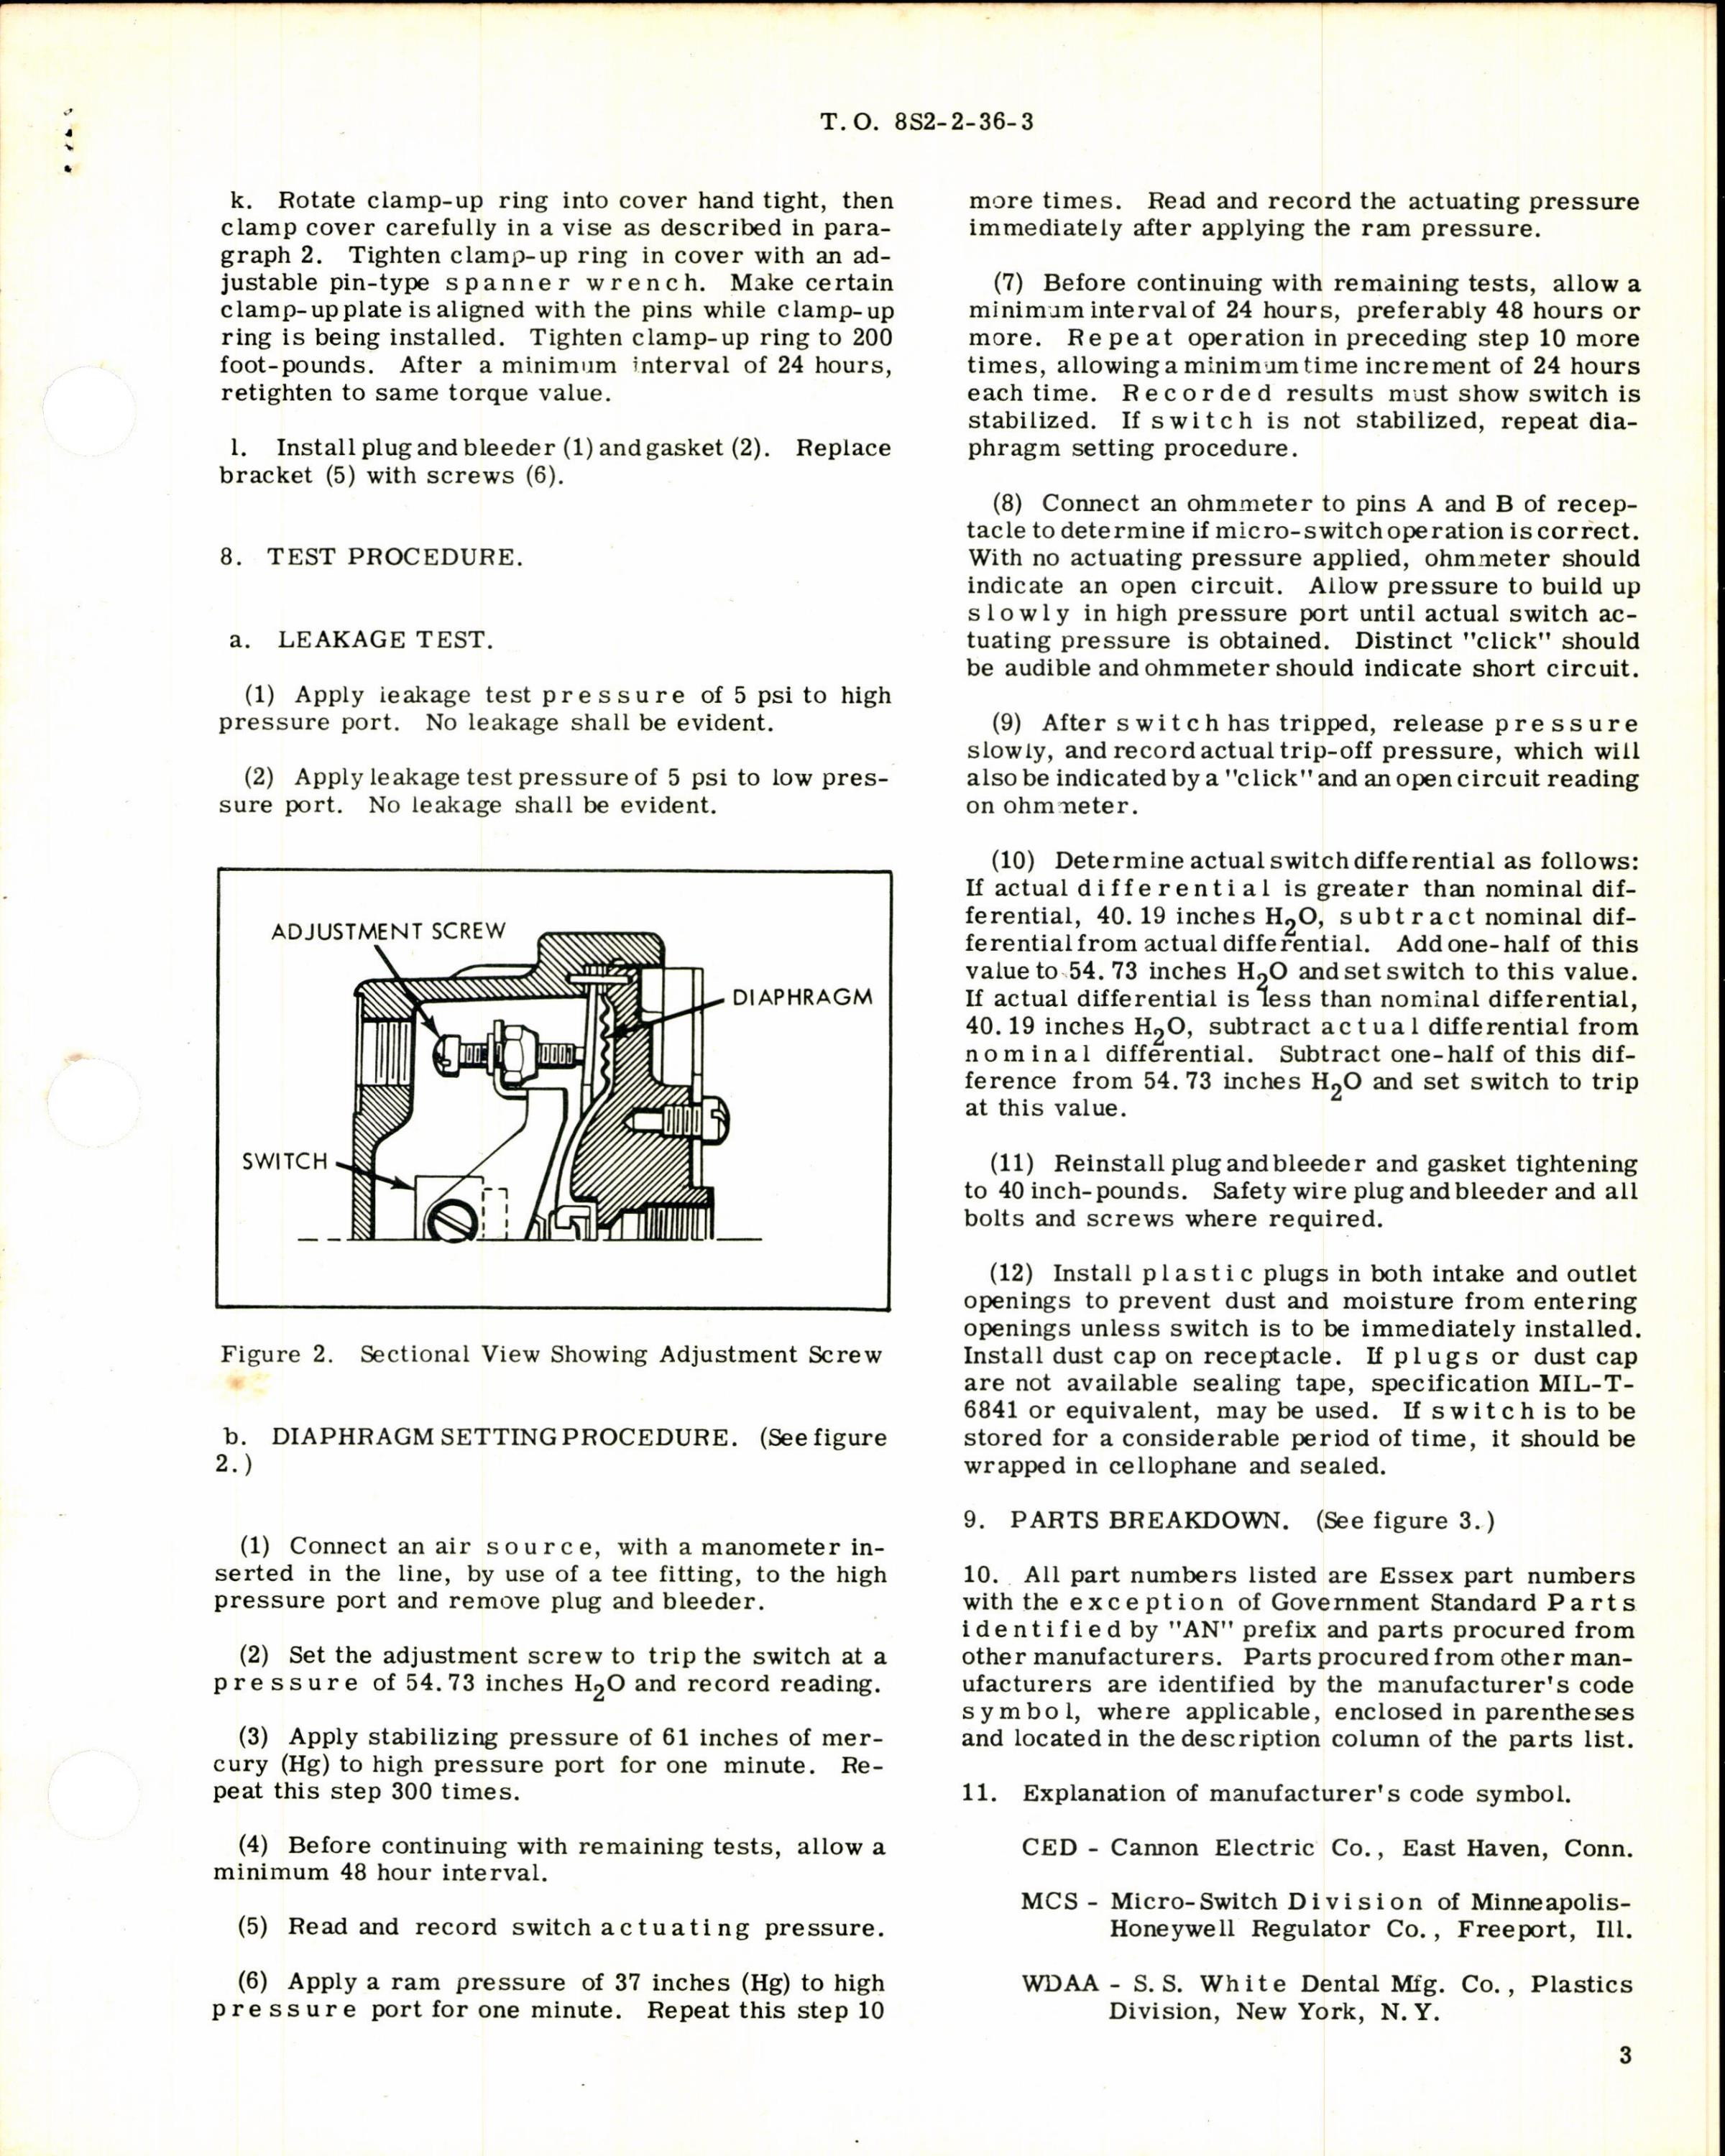 Sample page 3 from AirCorps Library document: Differential Pressure Switch 69000-3